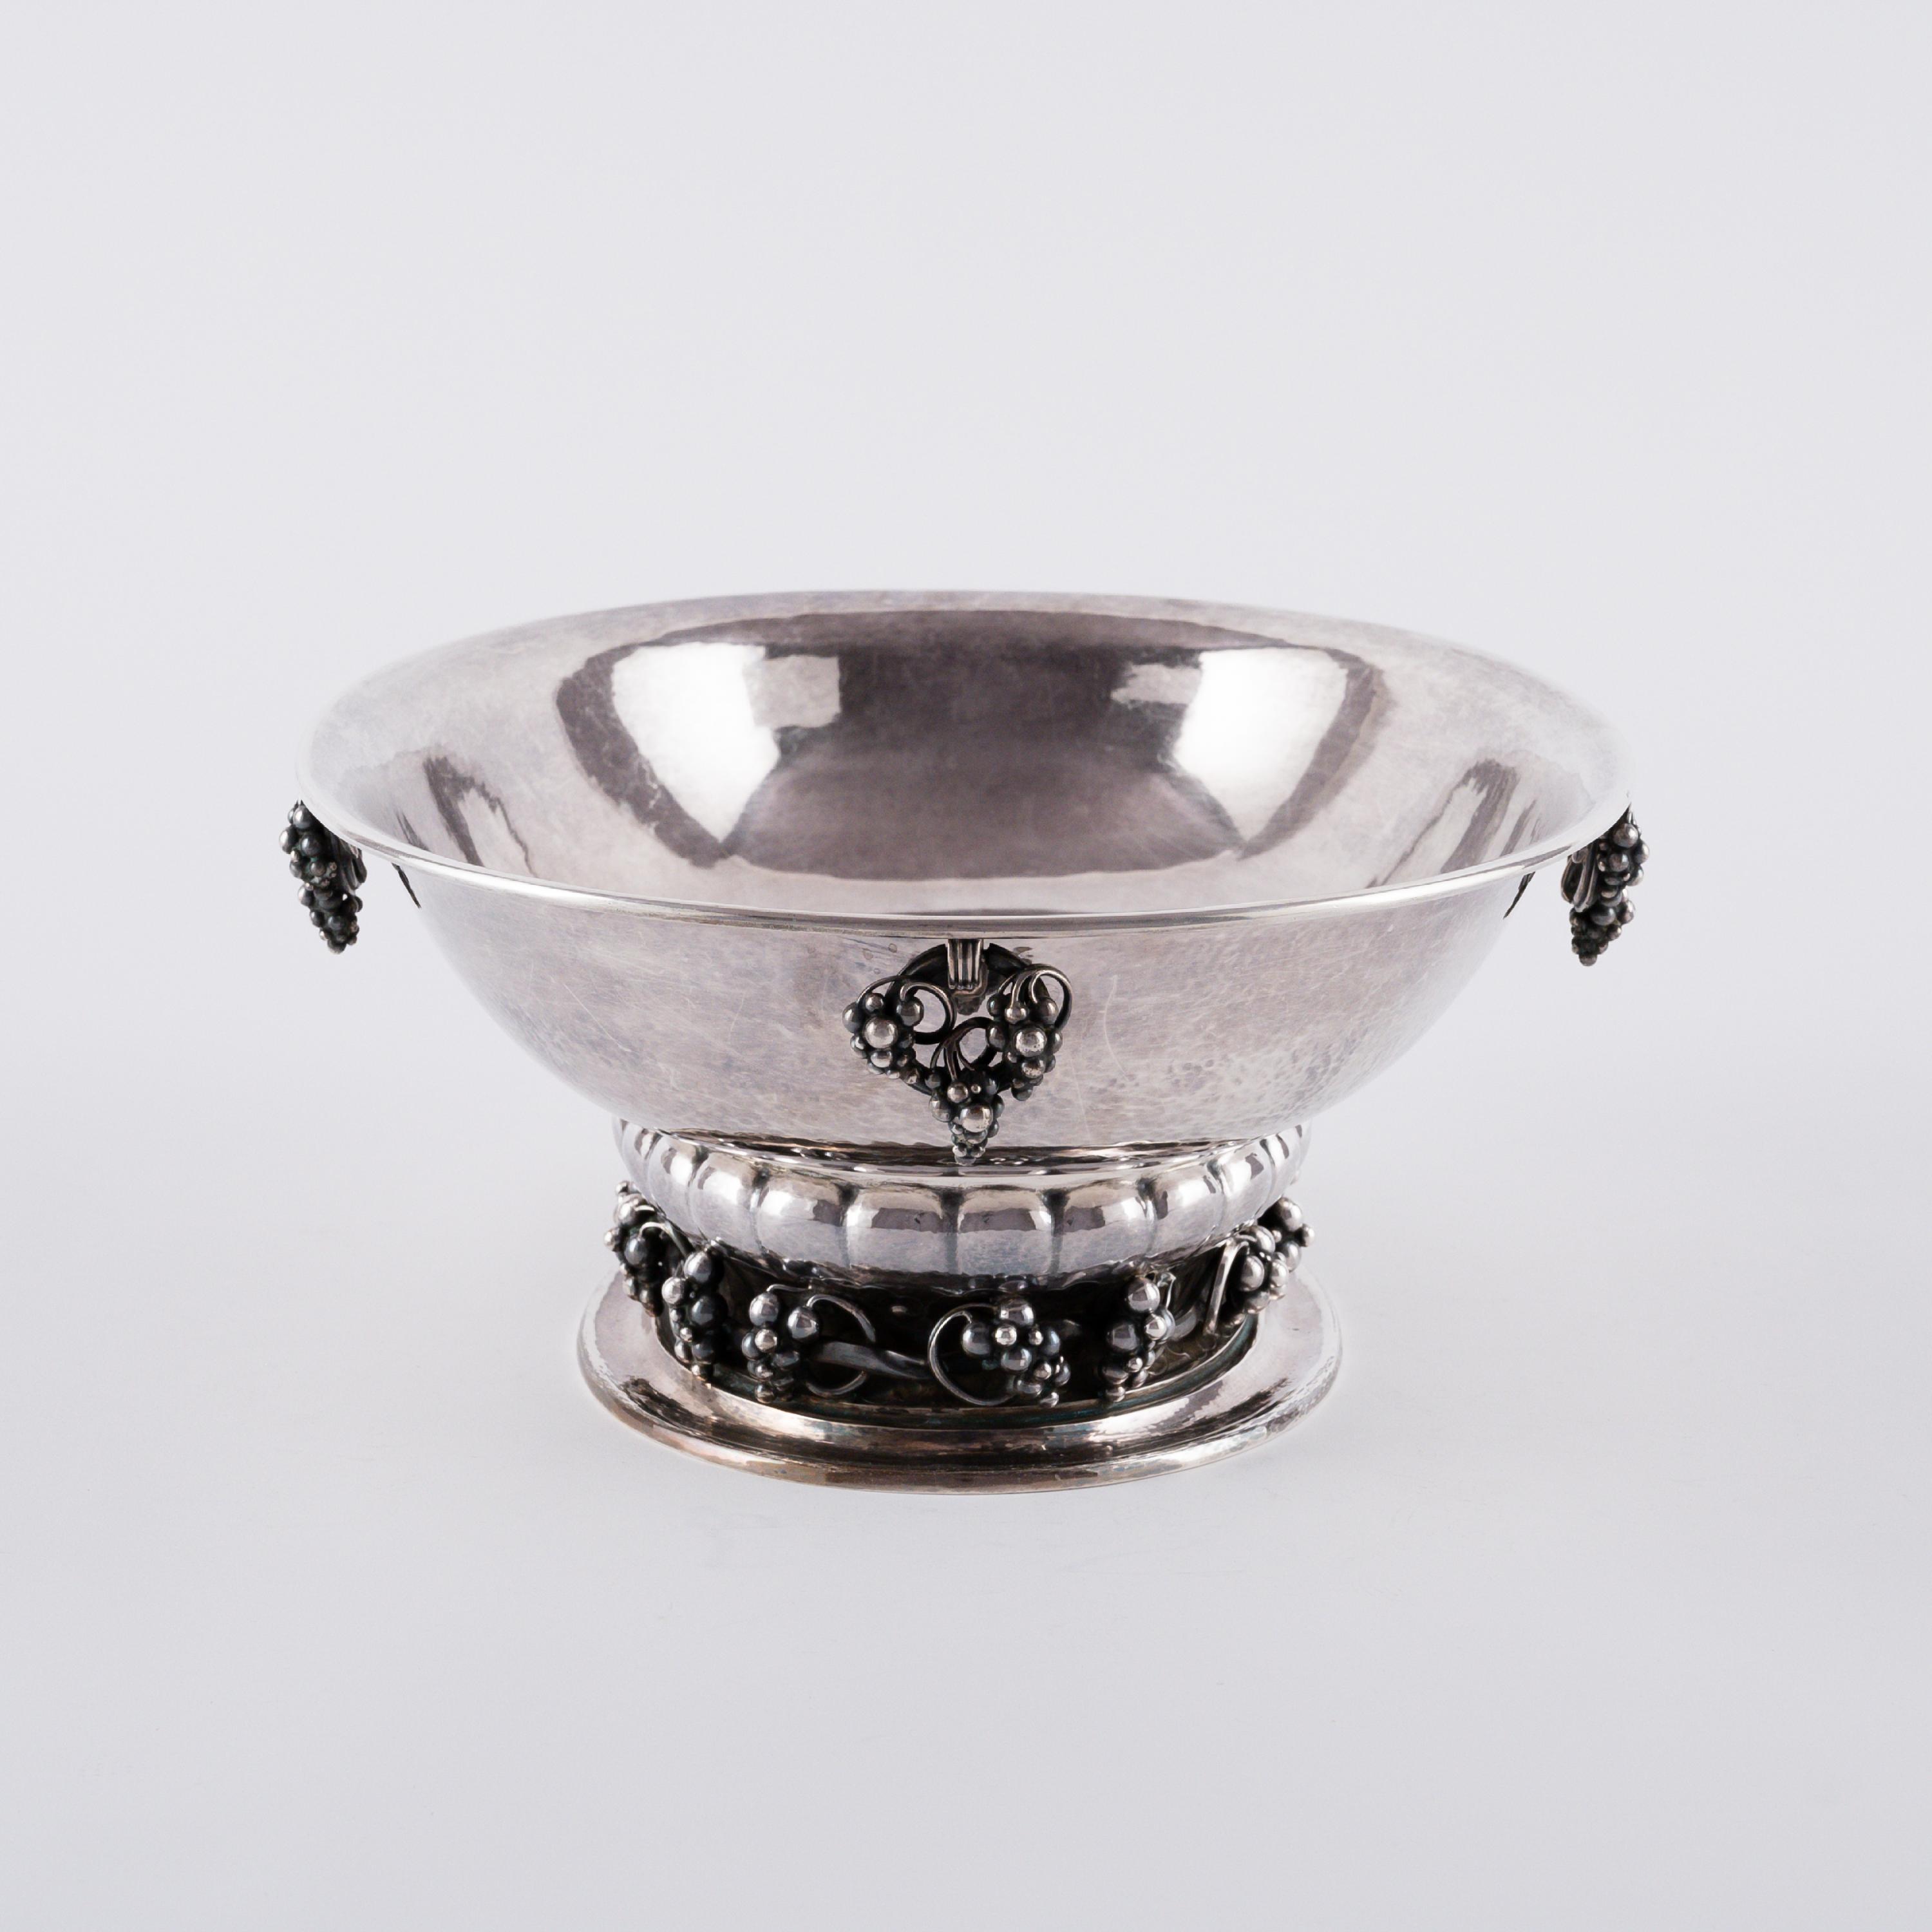 LARGE SILVER FOOTED BOWL WITH GRAPE DECOR - Image 3 of 7